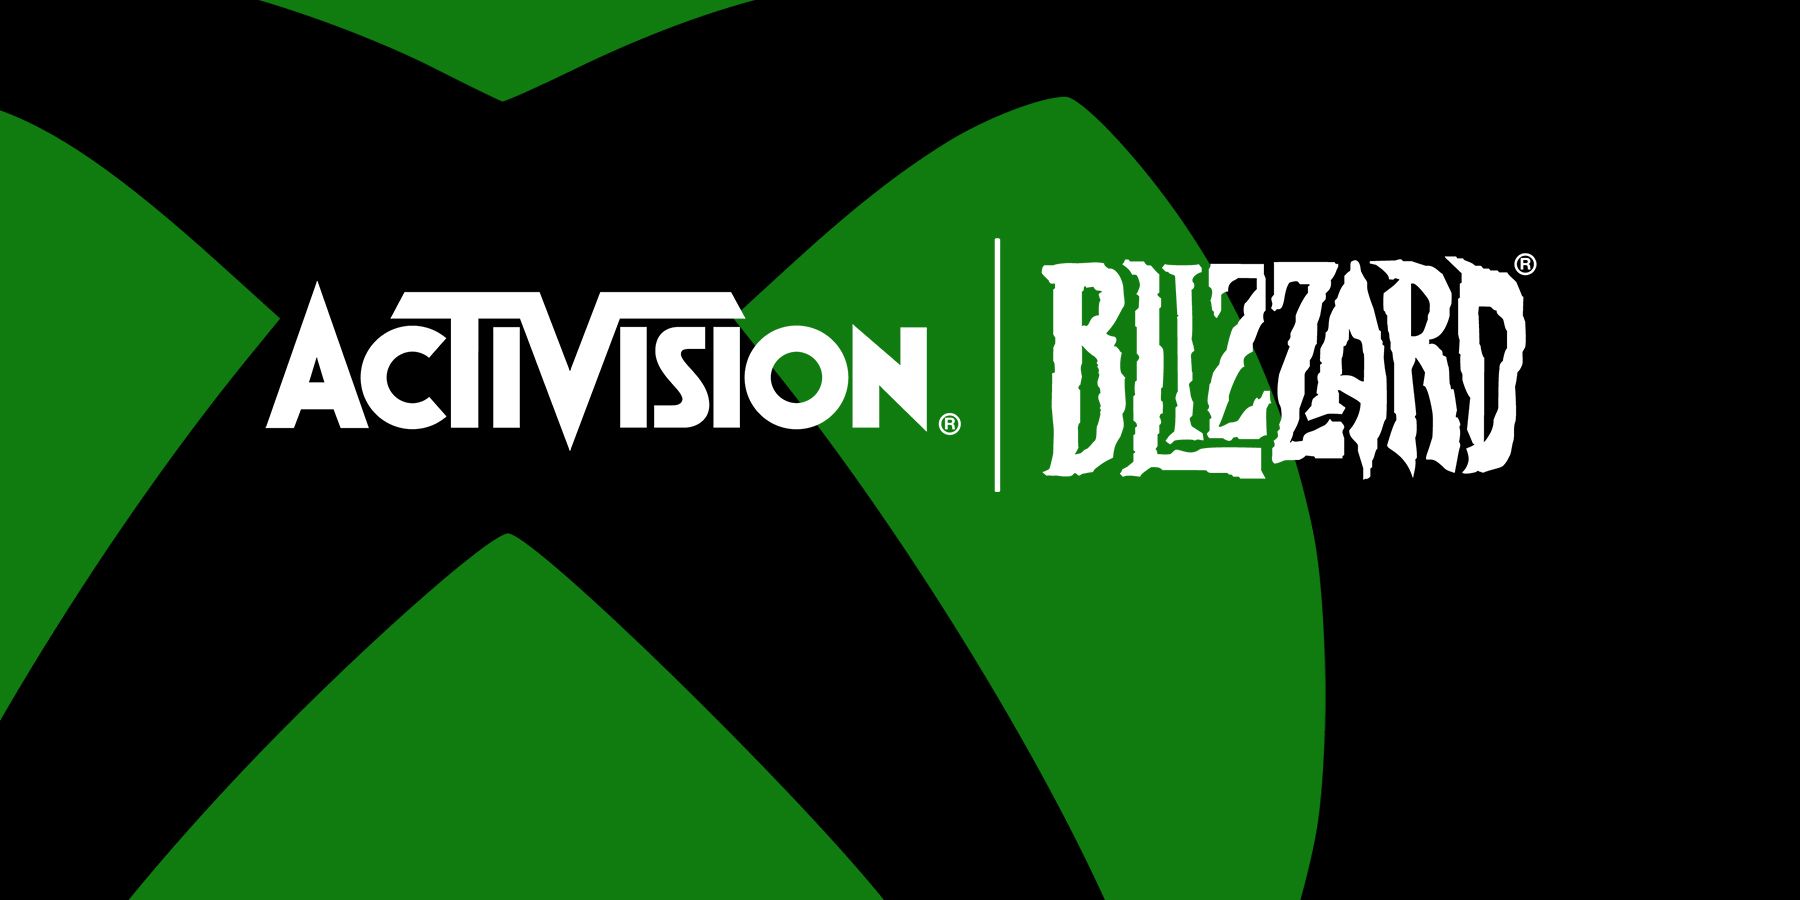 Activision Blizzard IPs included in Microsoft acquisition